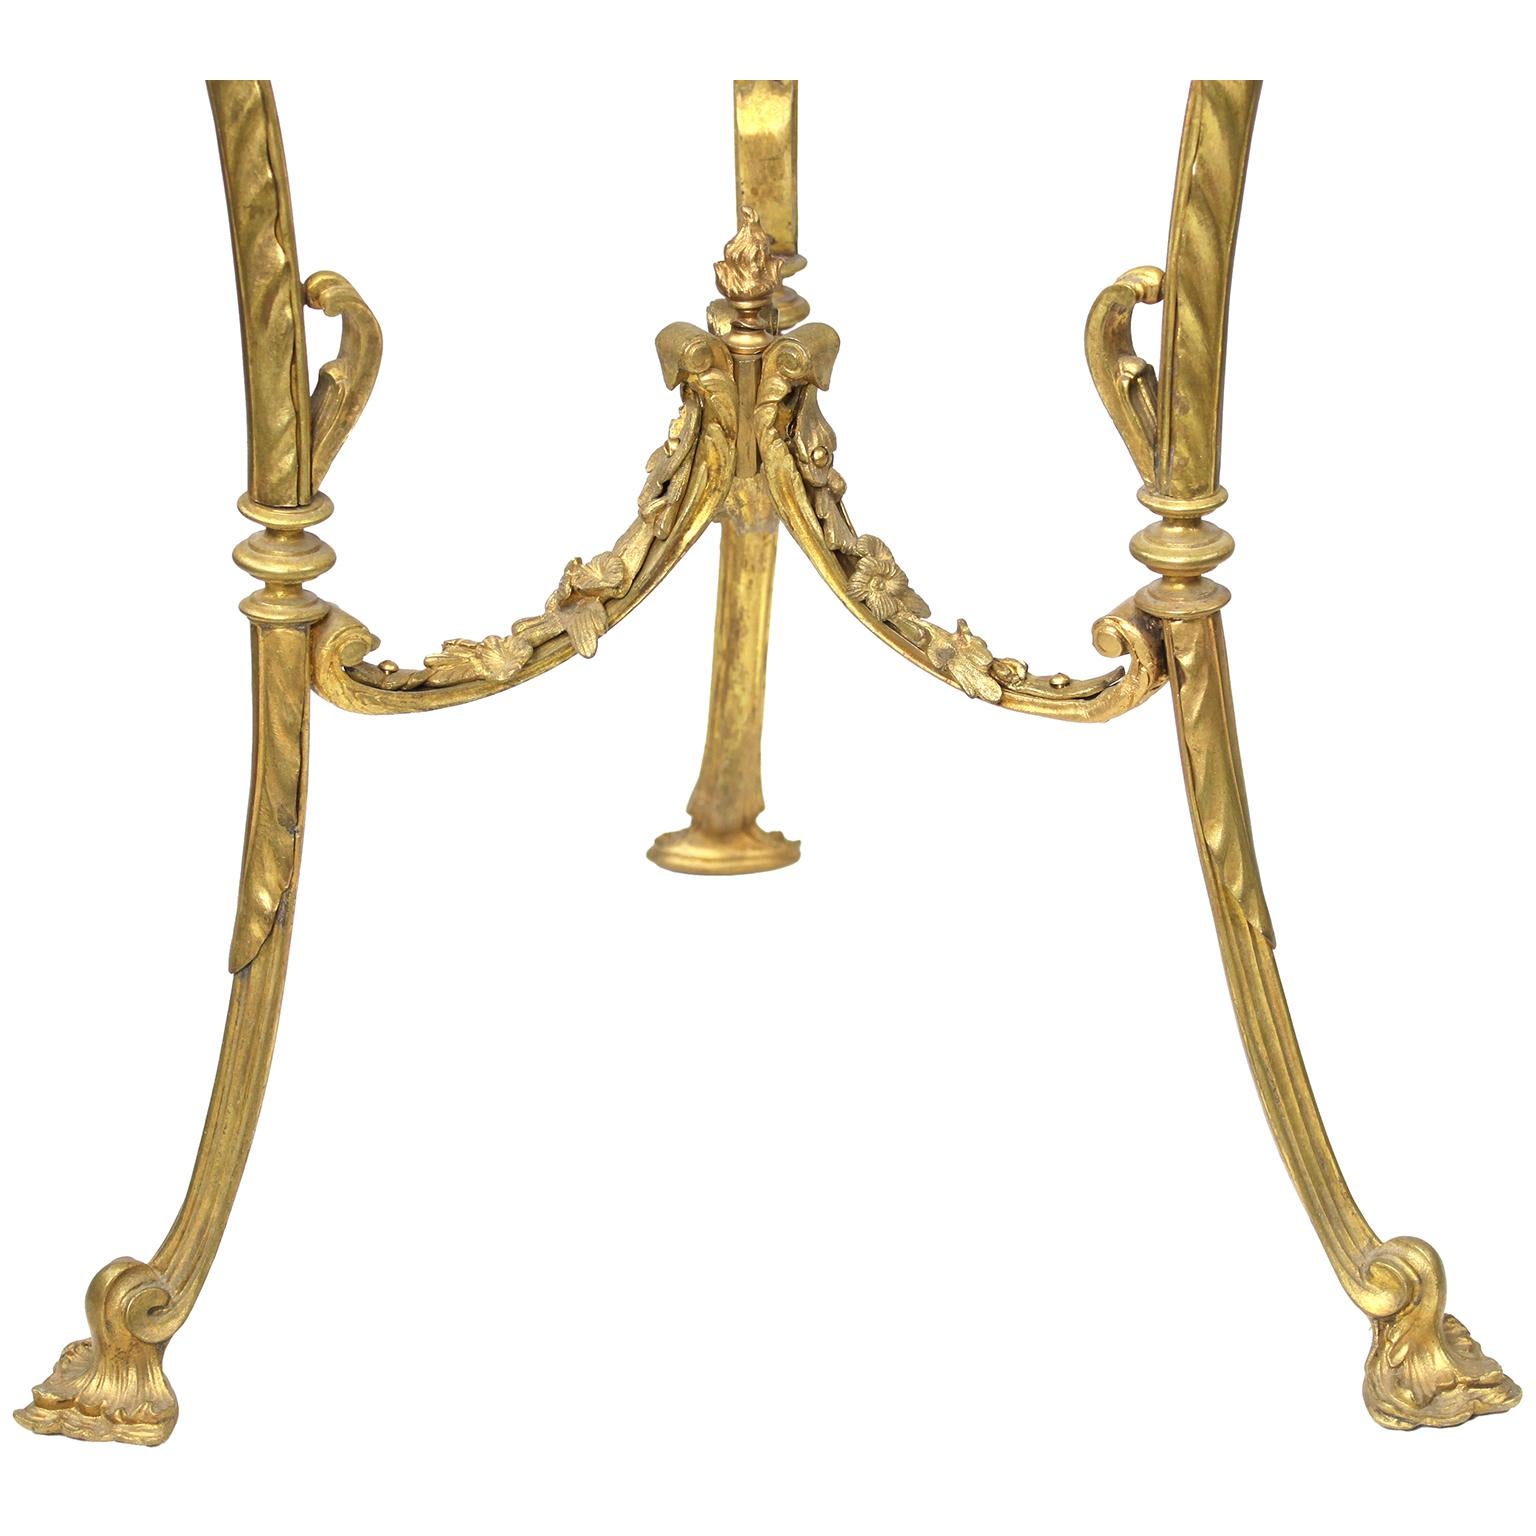 A French Belle Époque Louis XV Style Gilt-Bronze Gueridon Table with Marble Top For Sale 4